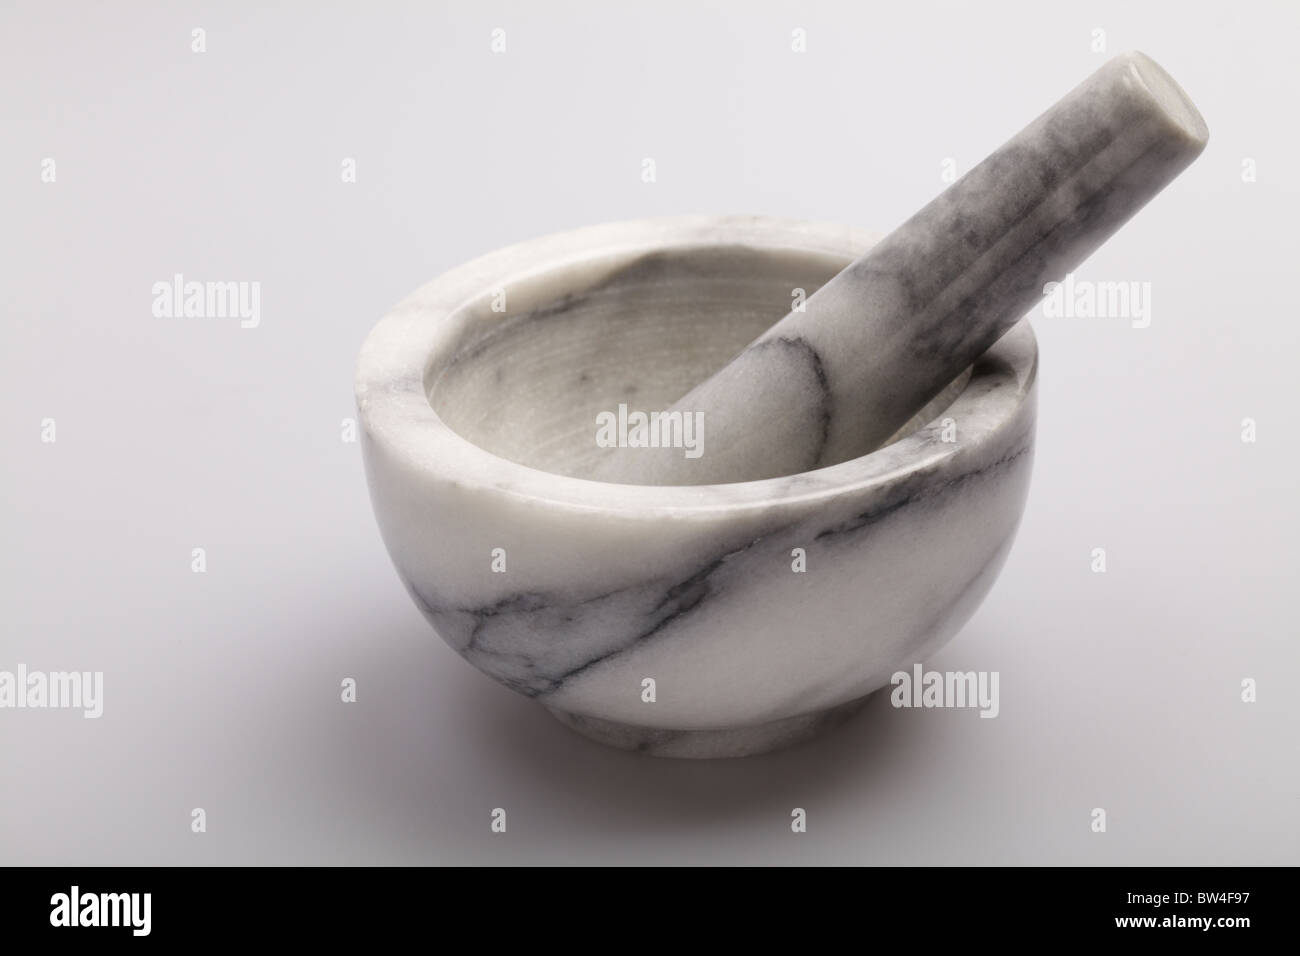 Grey and white marble pestle and mortar on a white surface Stock Photo